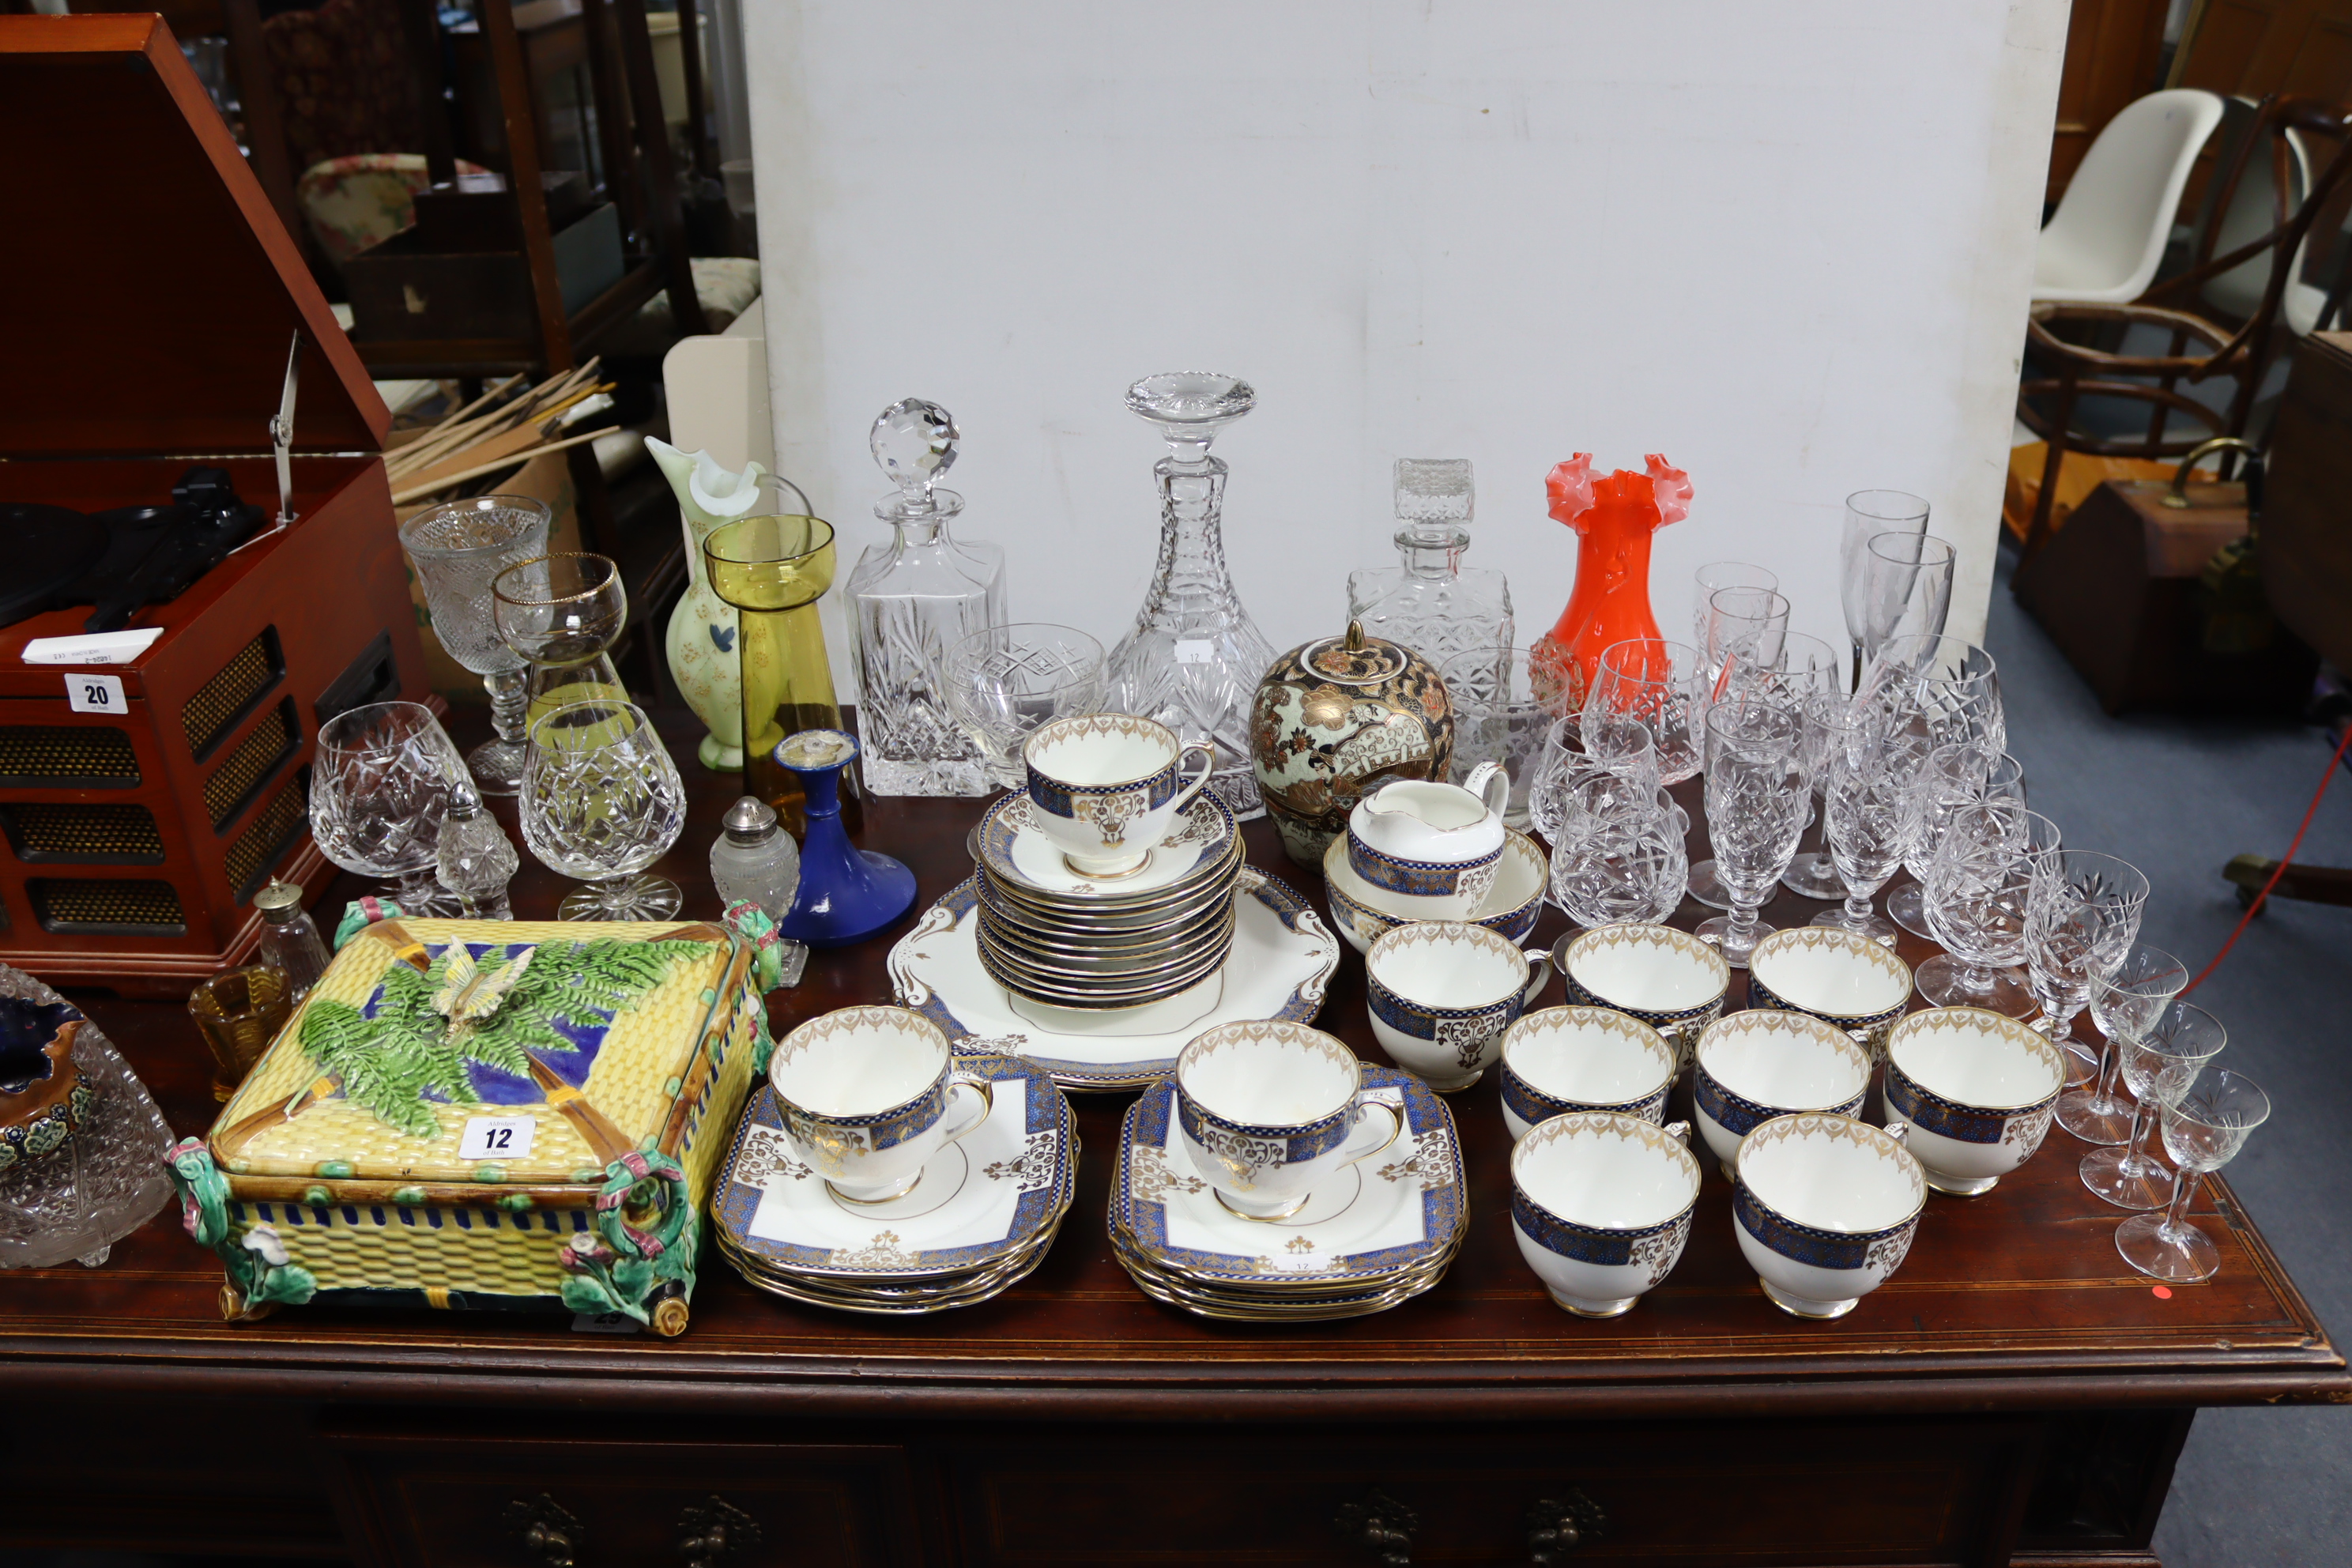 Various items of decorative china, glassware, etc., part w.a.f.